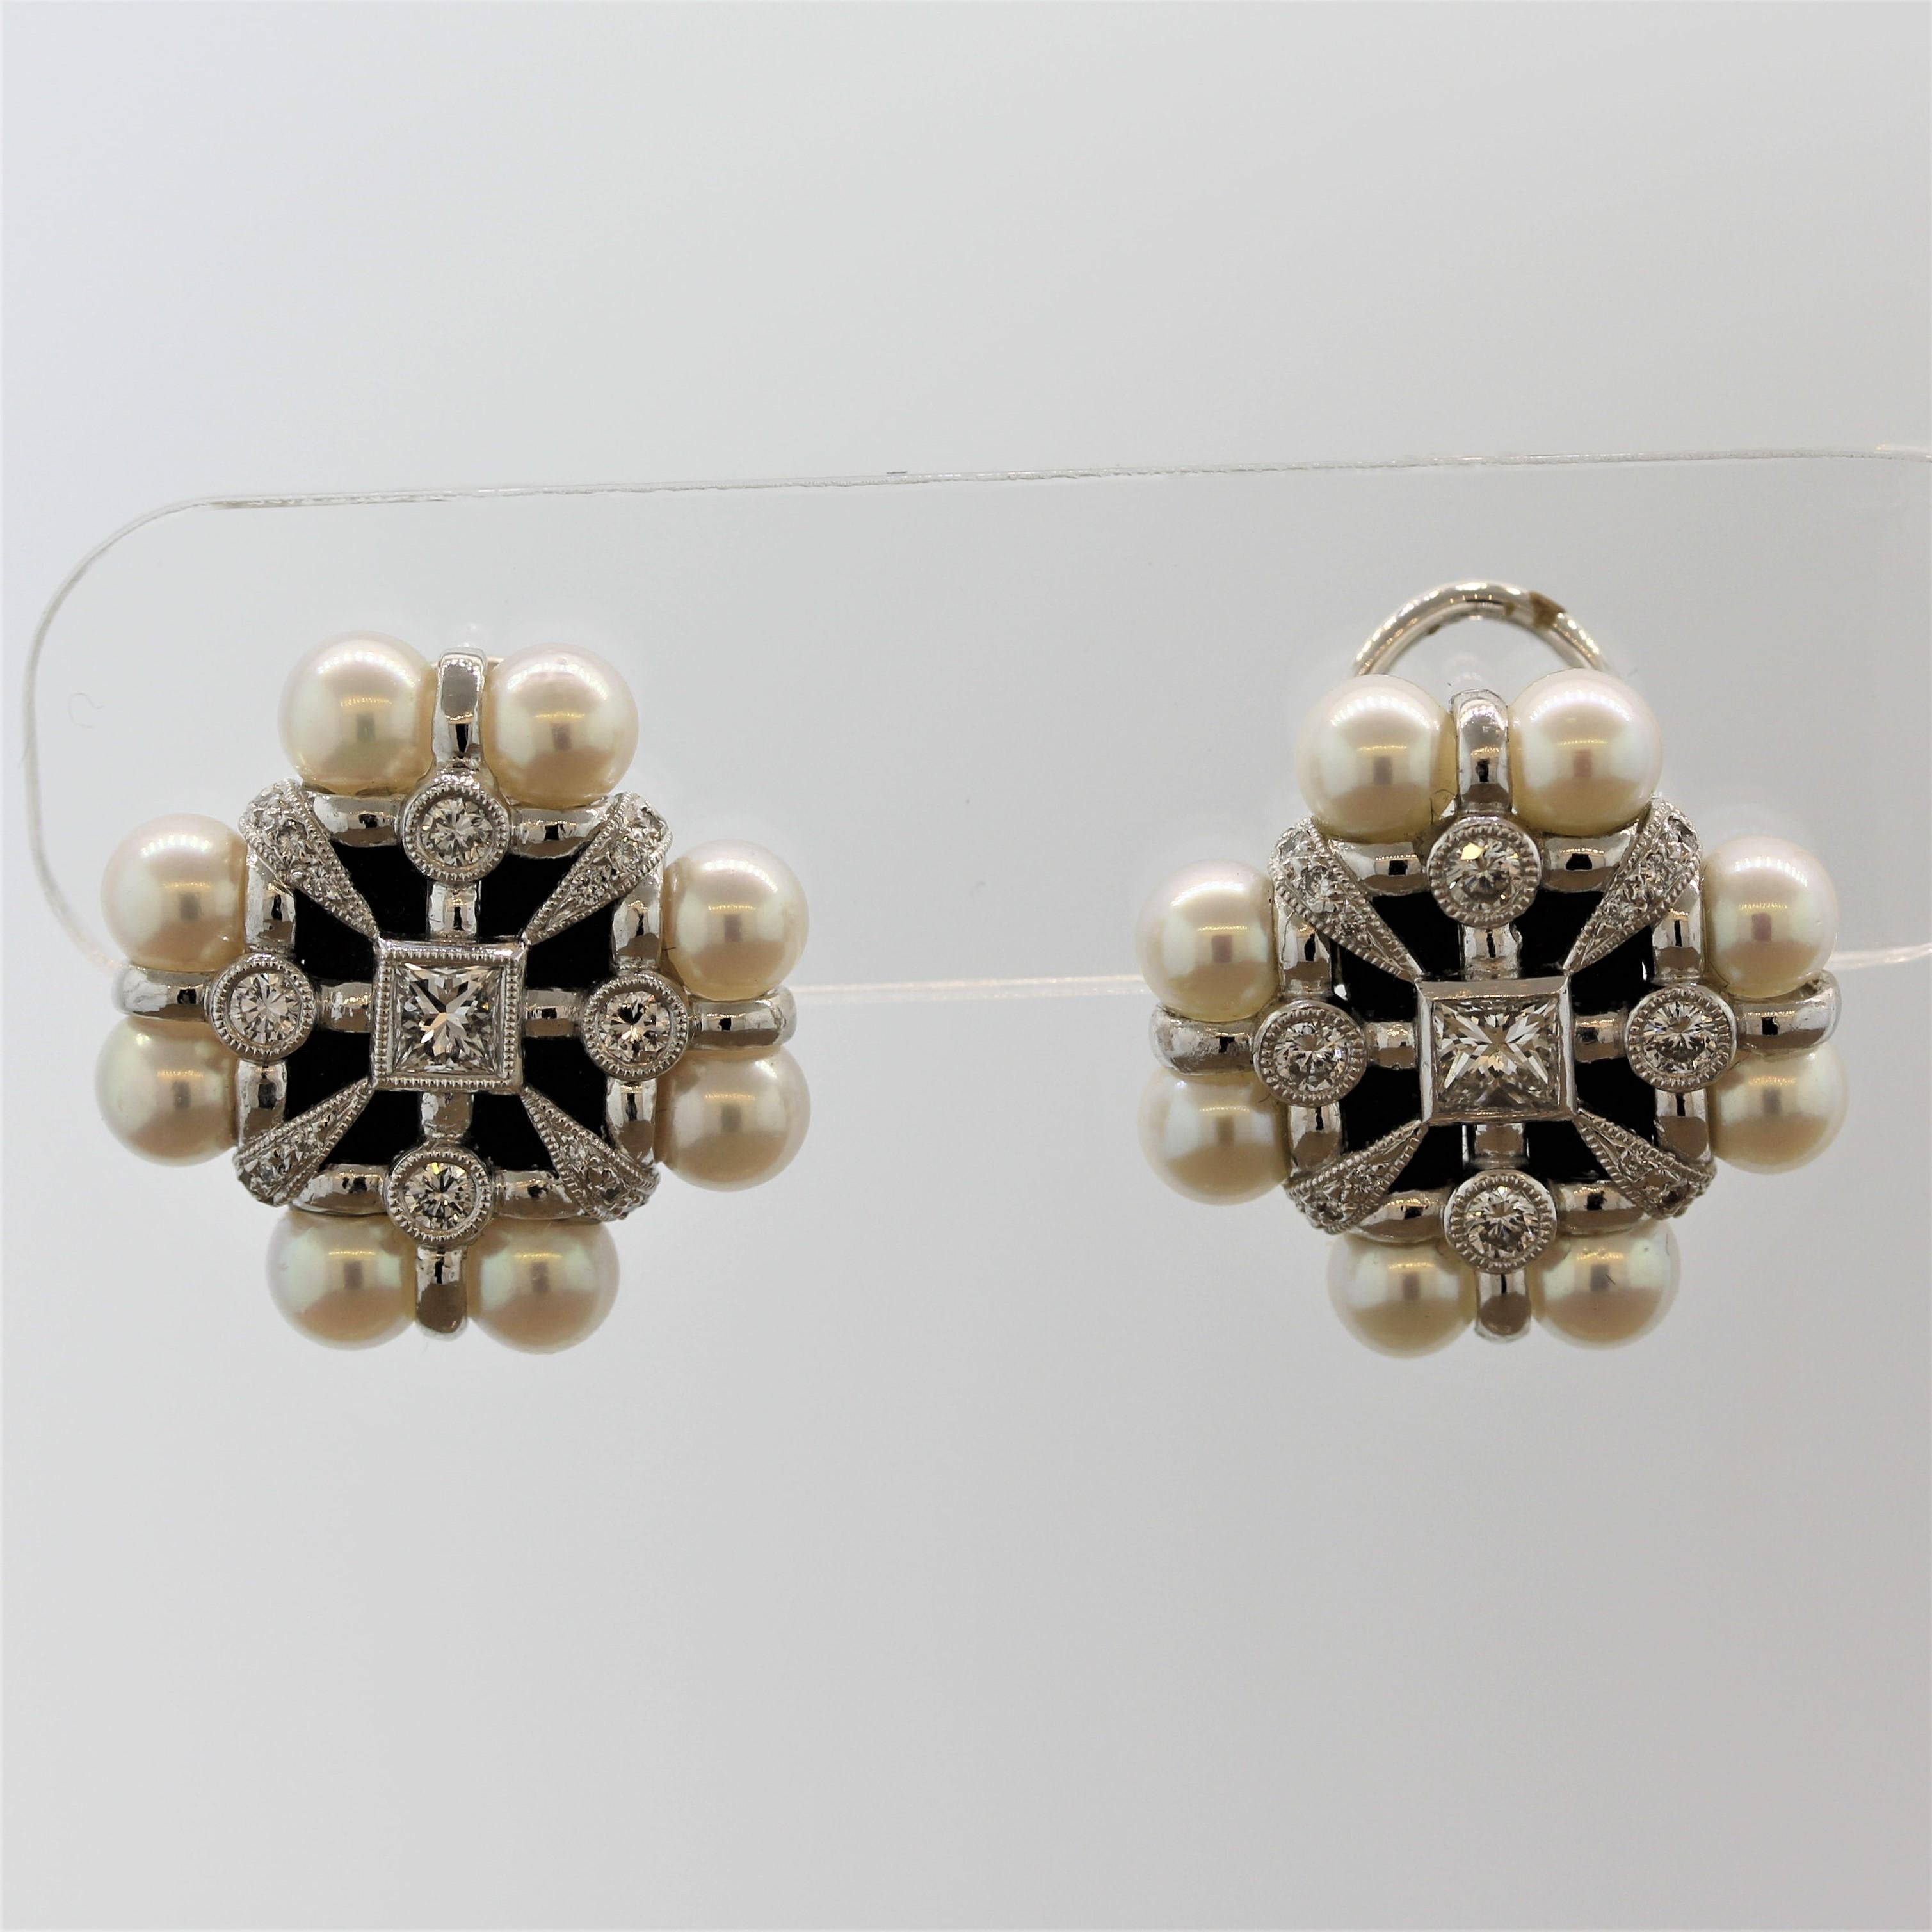 A unique geometric pair of earrings featuring 16 Akoya pearls and 1.46 carats of round brilliant and princess cut diamonds. Black onyx adds contrast to the piece. It is made in 18k white gold.

Length: 0.8 inches